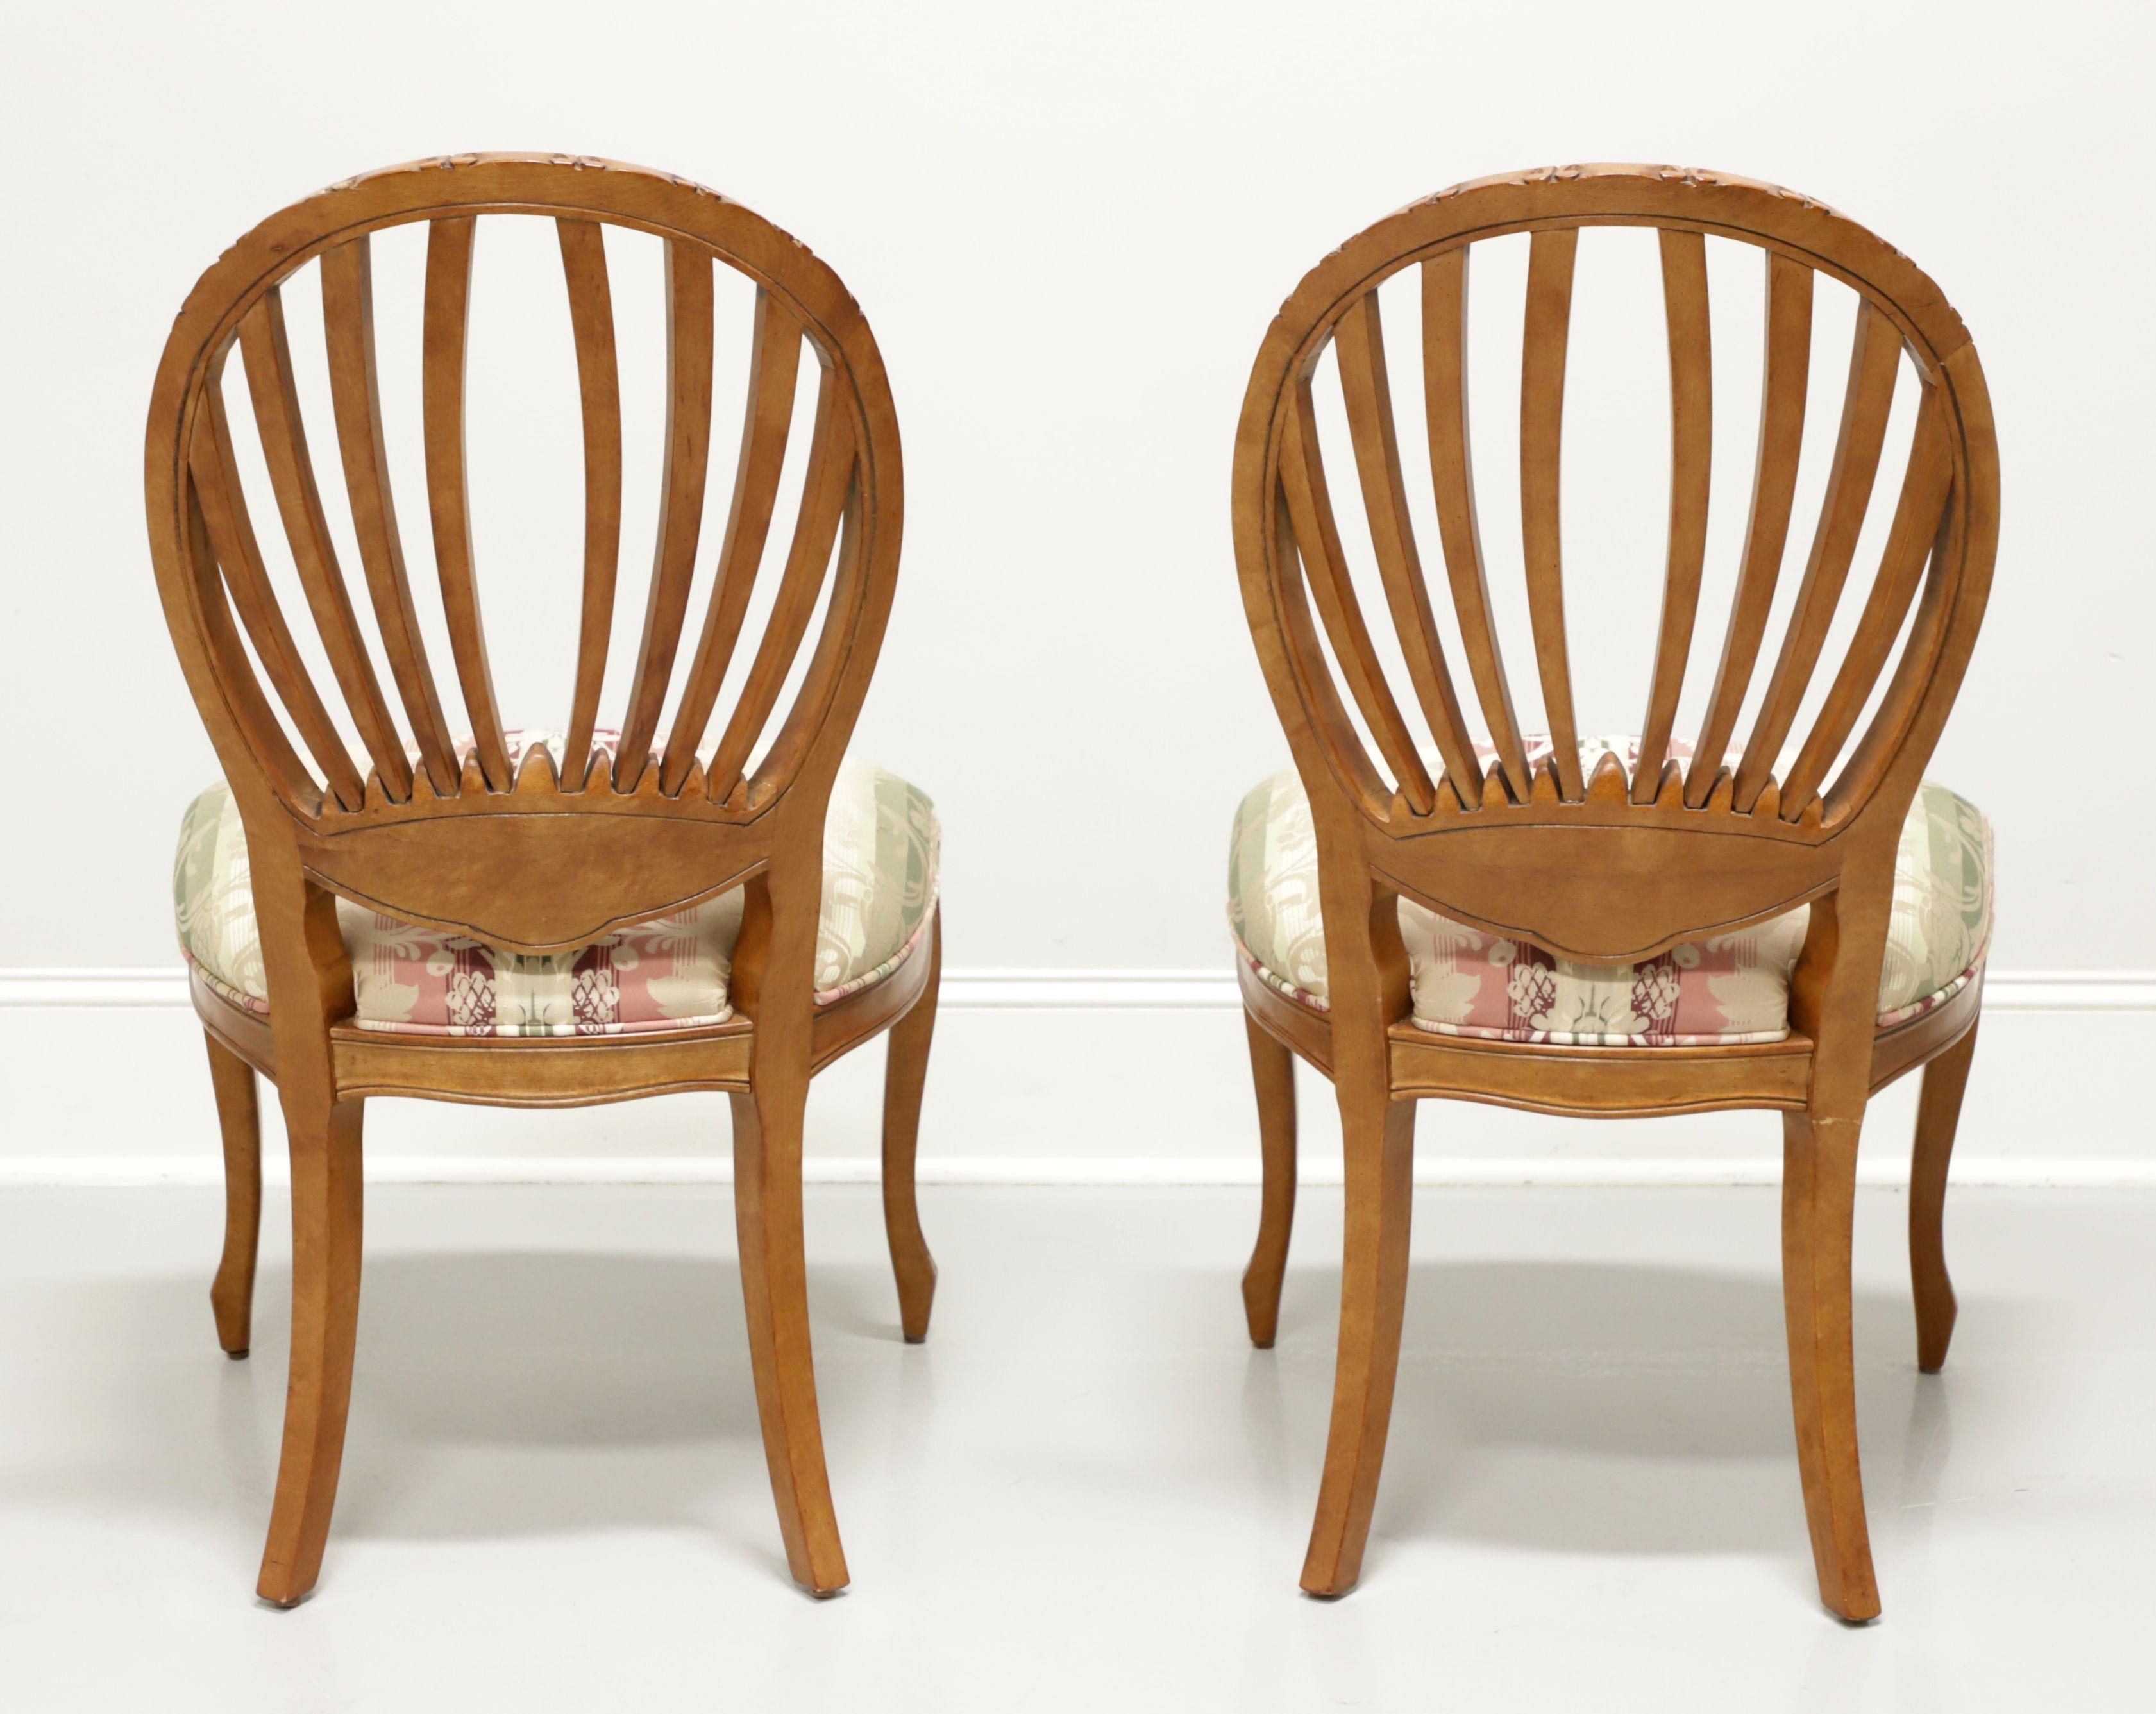 CENTURY French Country Oval Back Dining Side Chairs - Paar A im Zustand „Gut“ im Angebot in Charlotte, NC